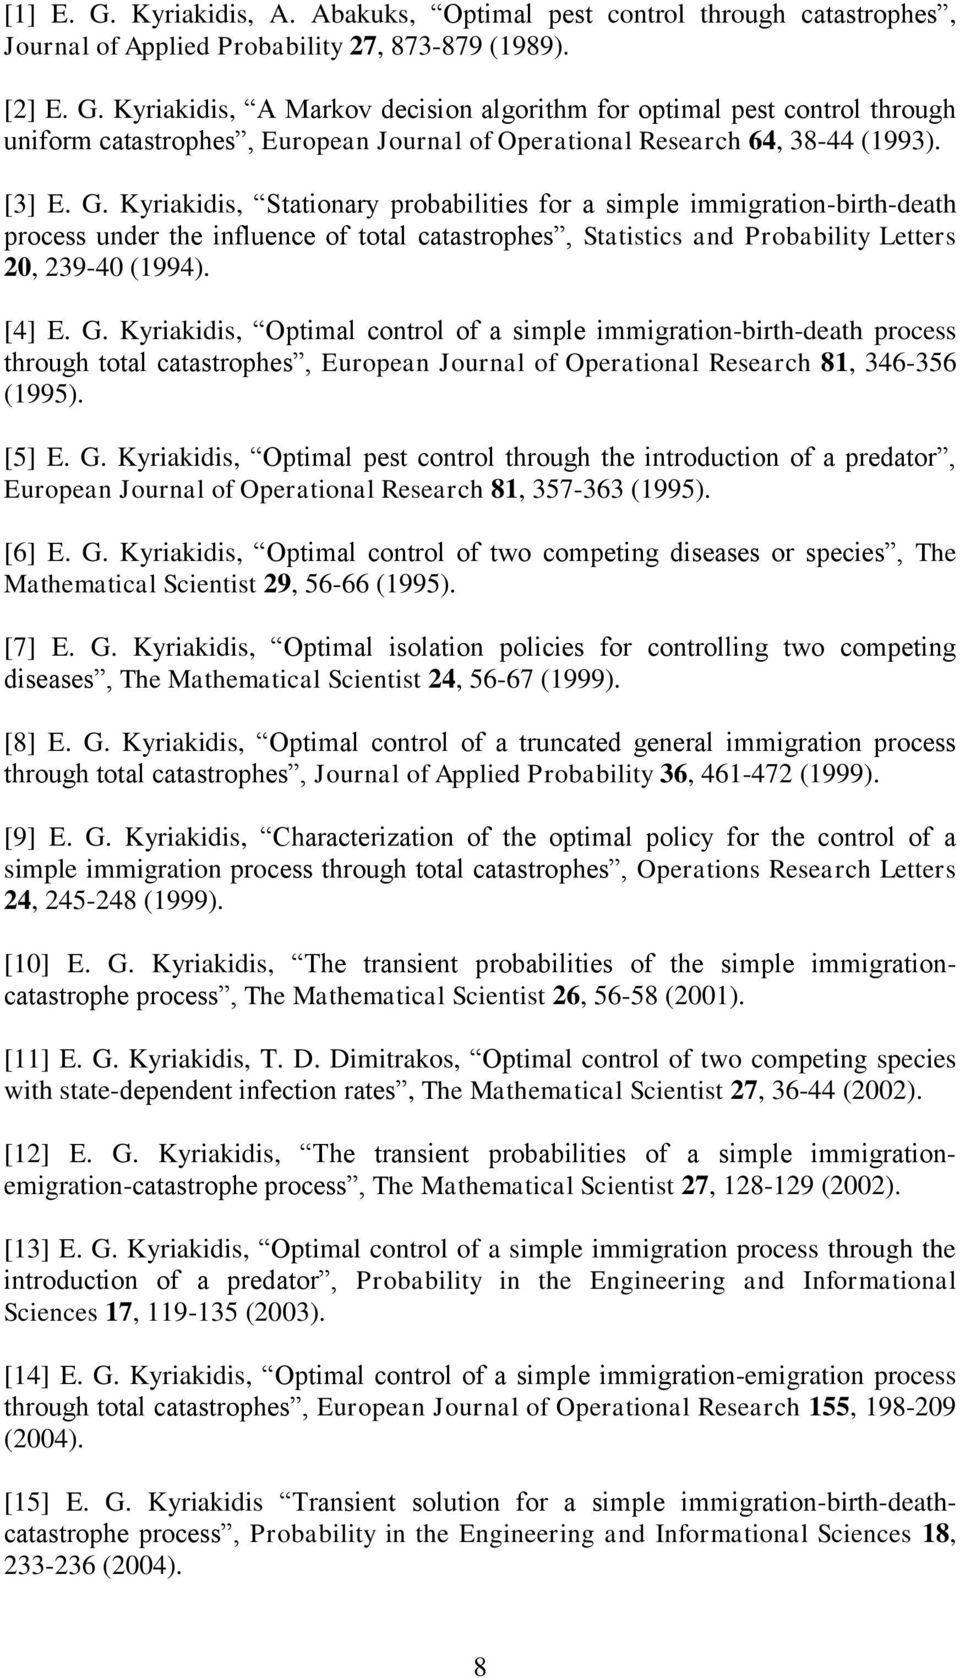 [5] E. G. Kyriakidis, Optimal pest control through the introduction of a predator, European Journal of Operational Research 81, 357-363 (1995). [6] E. G. Kyriakidis, Optimal control of two competing diseases or species, The Mathematical Scientist 29, 56-66 (1995).